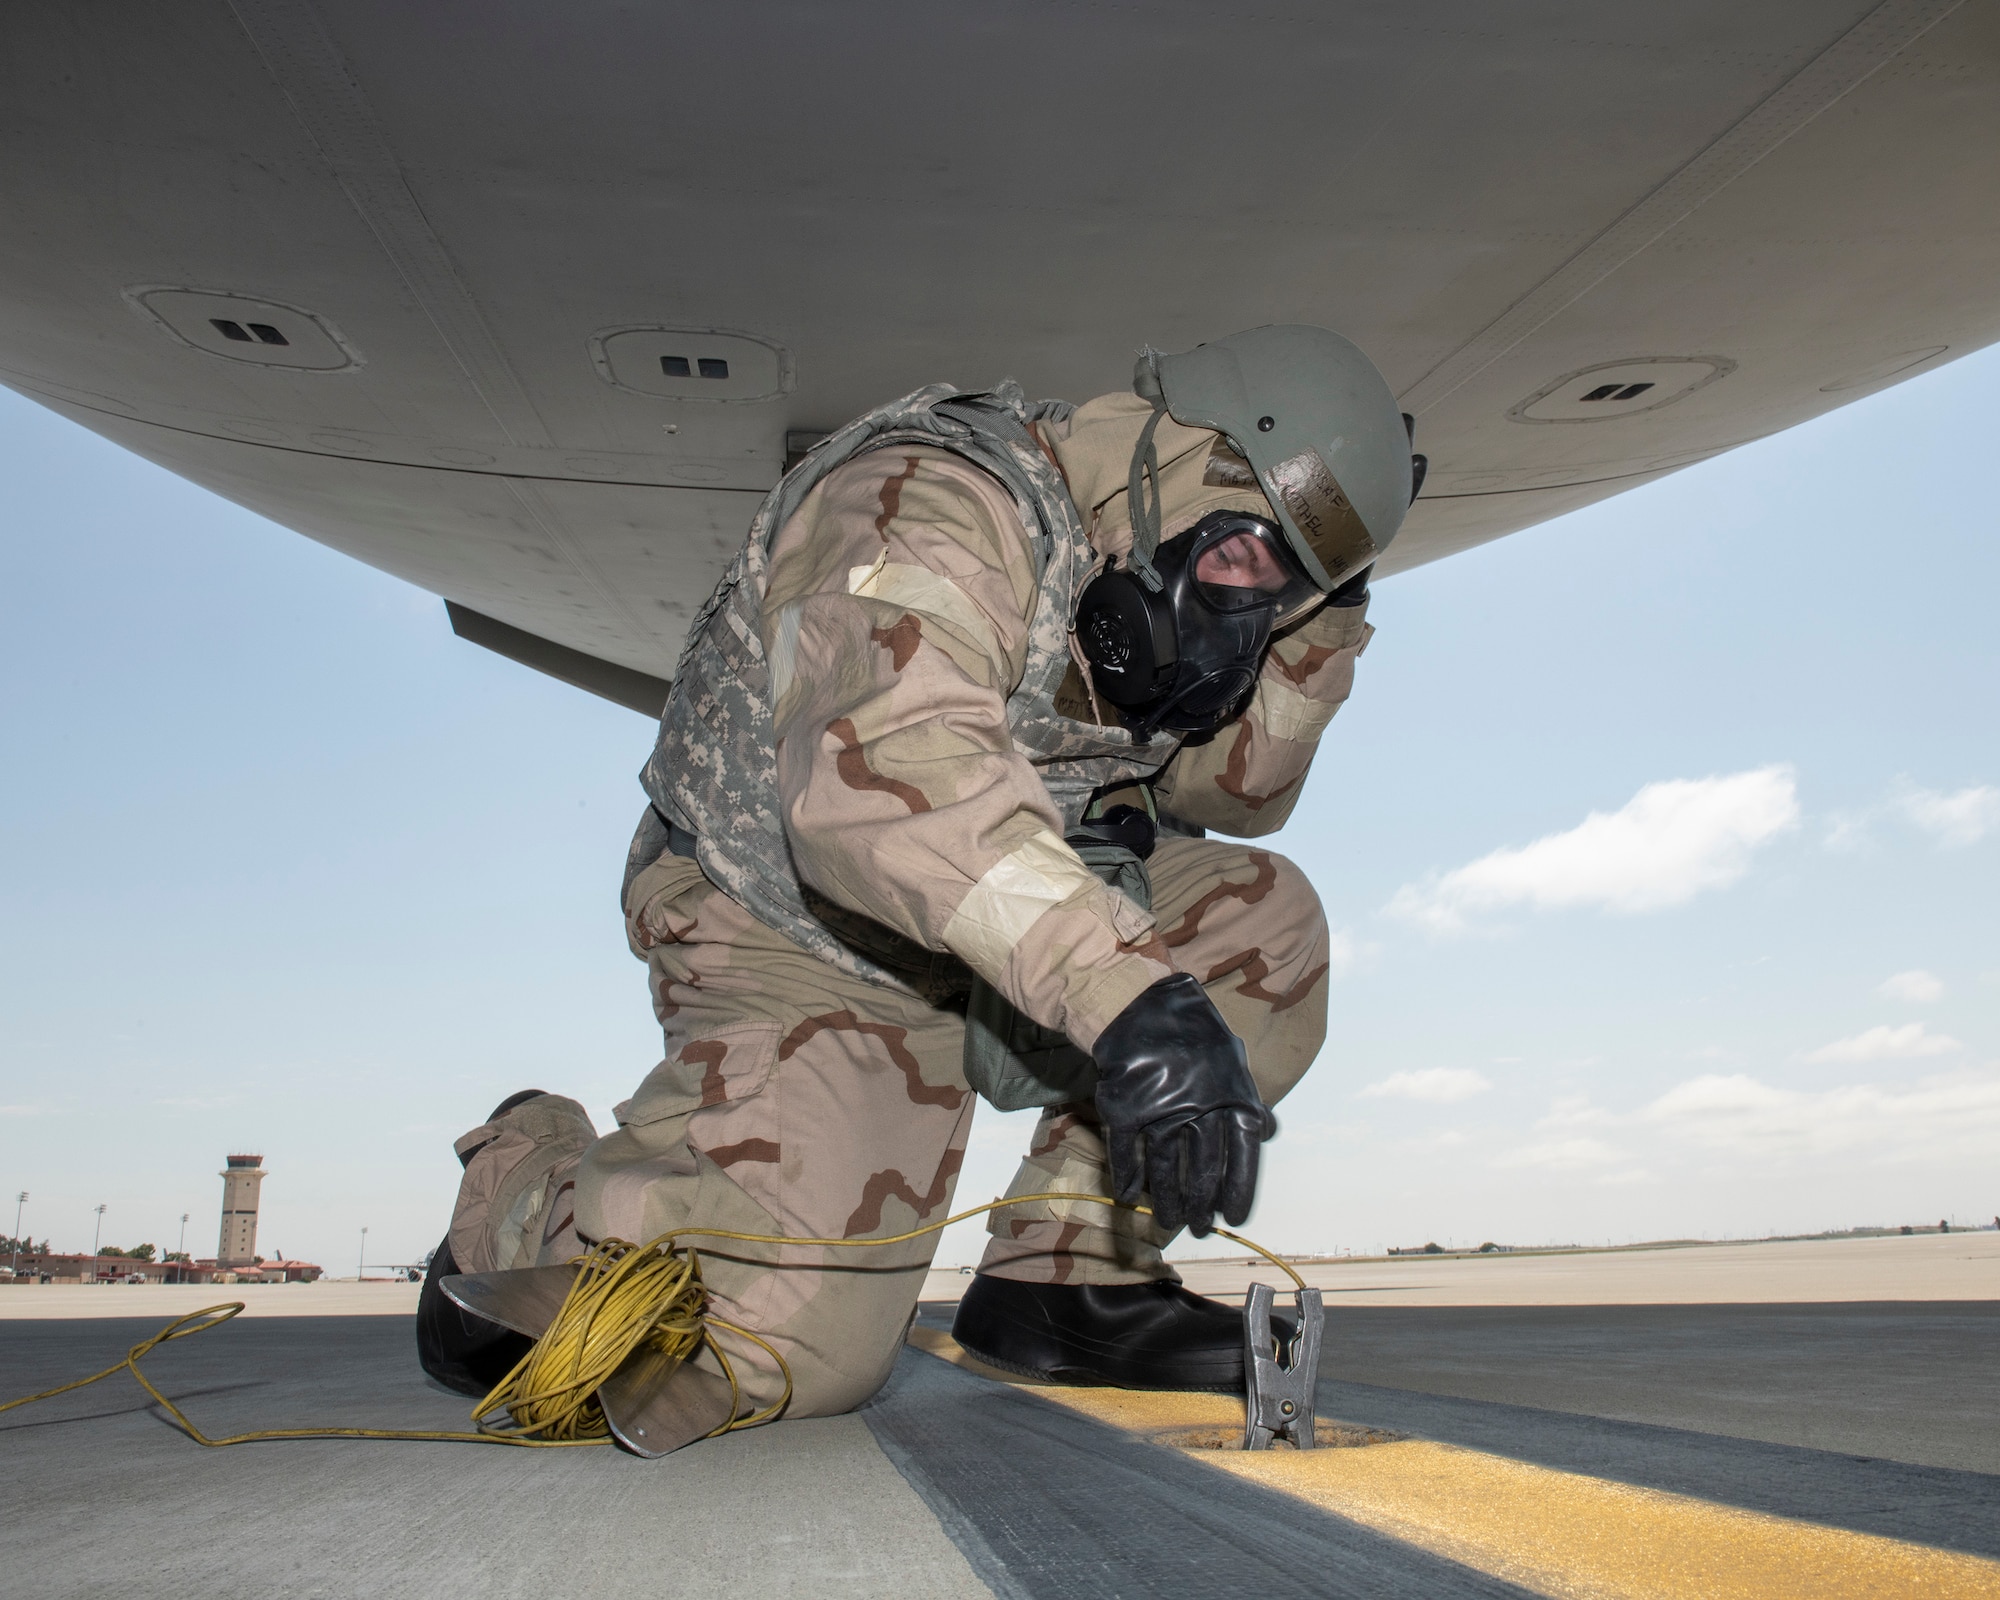 U.S. Air Force Senior Airman Matthew Hatcher, 860th Aircraft Maintenance Squadron, grounds a C-17 Globemaster III during a readiness exercise at Travis Air Force Base, California, May 9, 2019. The base conducted a week-long exercise that evaluated Travis’ readiness and ability to execute and sustain rapid global mobility around the world. (U.S. Air Force photo by Louis Briscese)